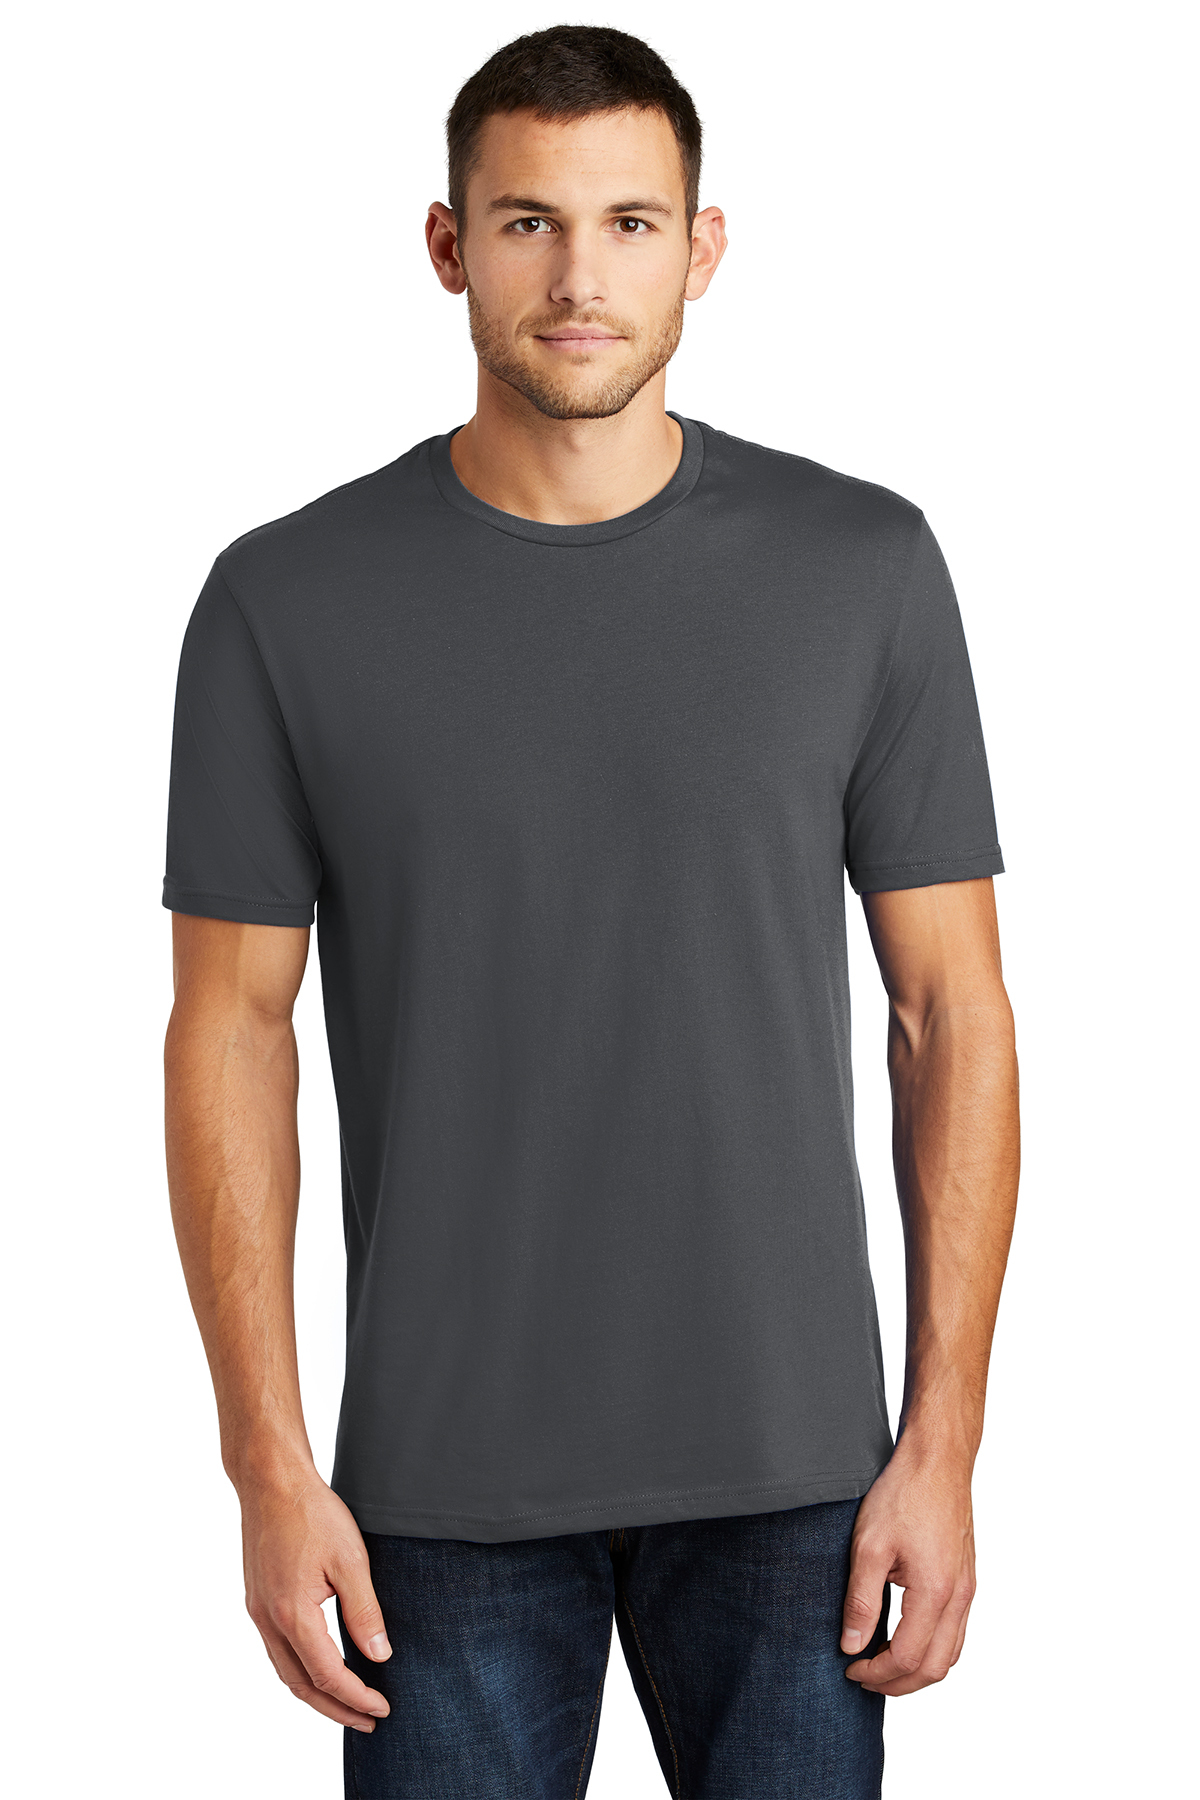 District Threads DT104 Mens Perfect Weight District Tee. - T-Shirts